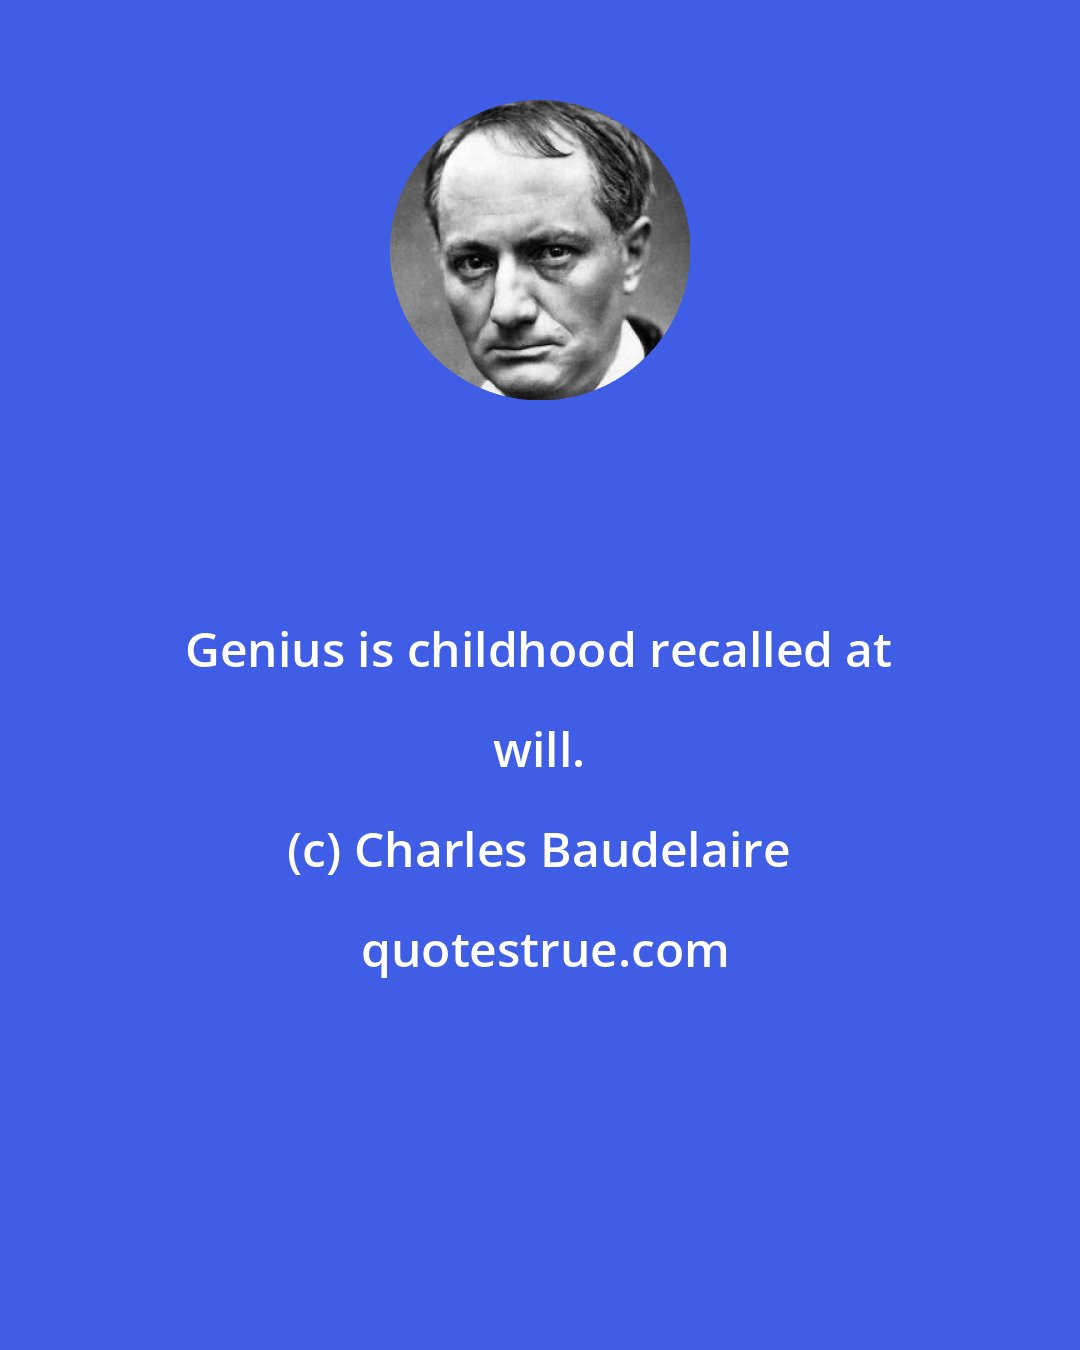 Charles Baudelaire: Genius is childhood recalled at will.